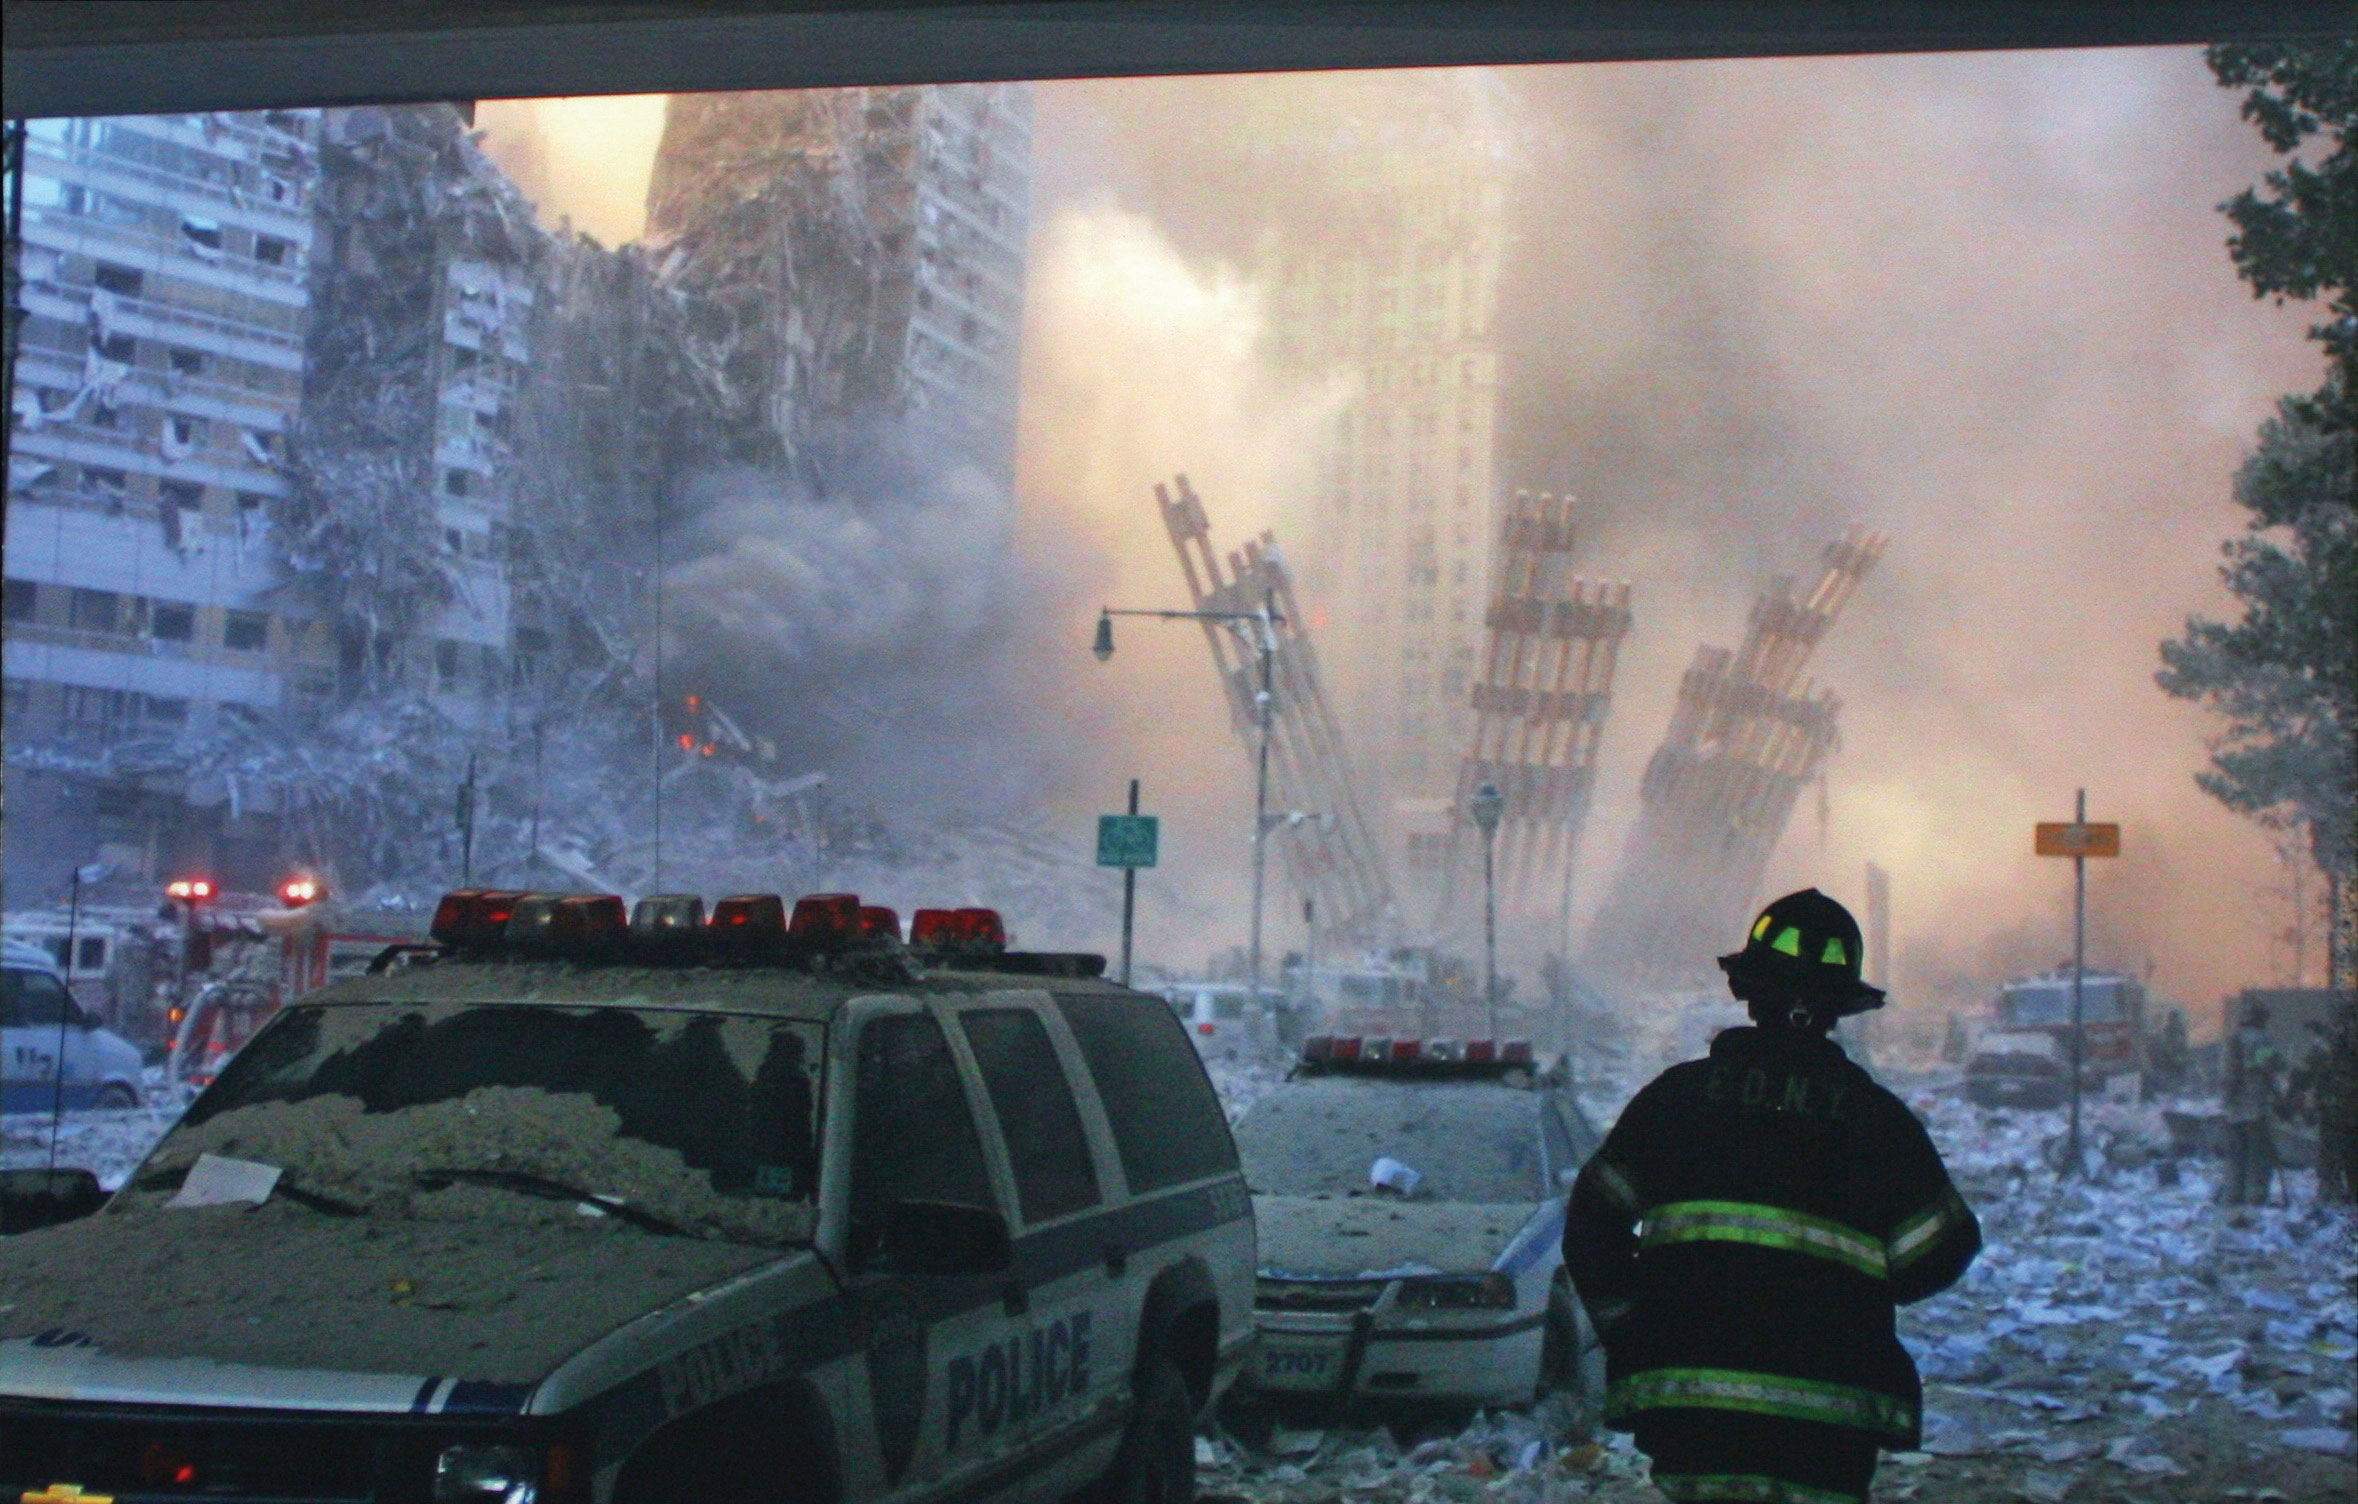 A firefighter standing in the remnants of the world trade center, after both towers collapsed